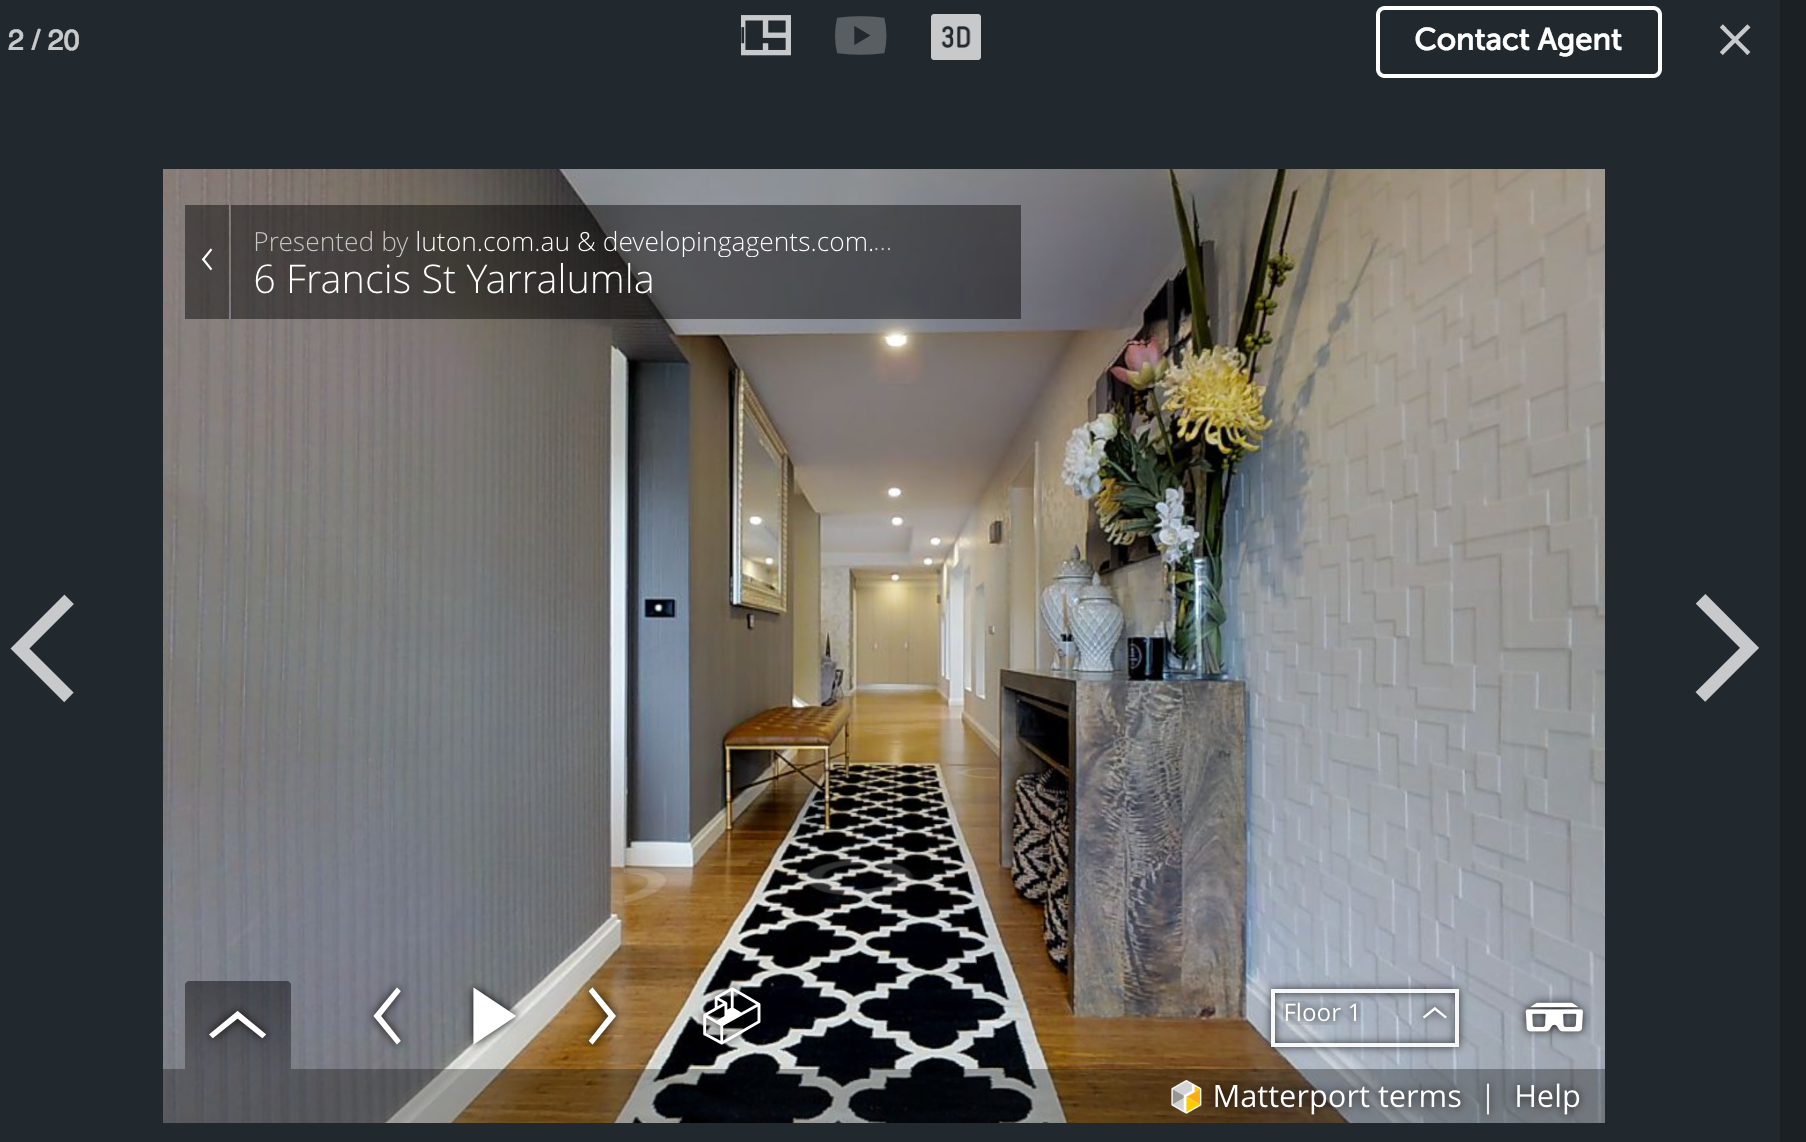 Realestate.com.au visitors can explore 3-D tours in the photo galleries of listings.